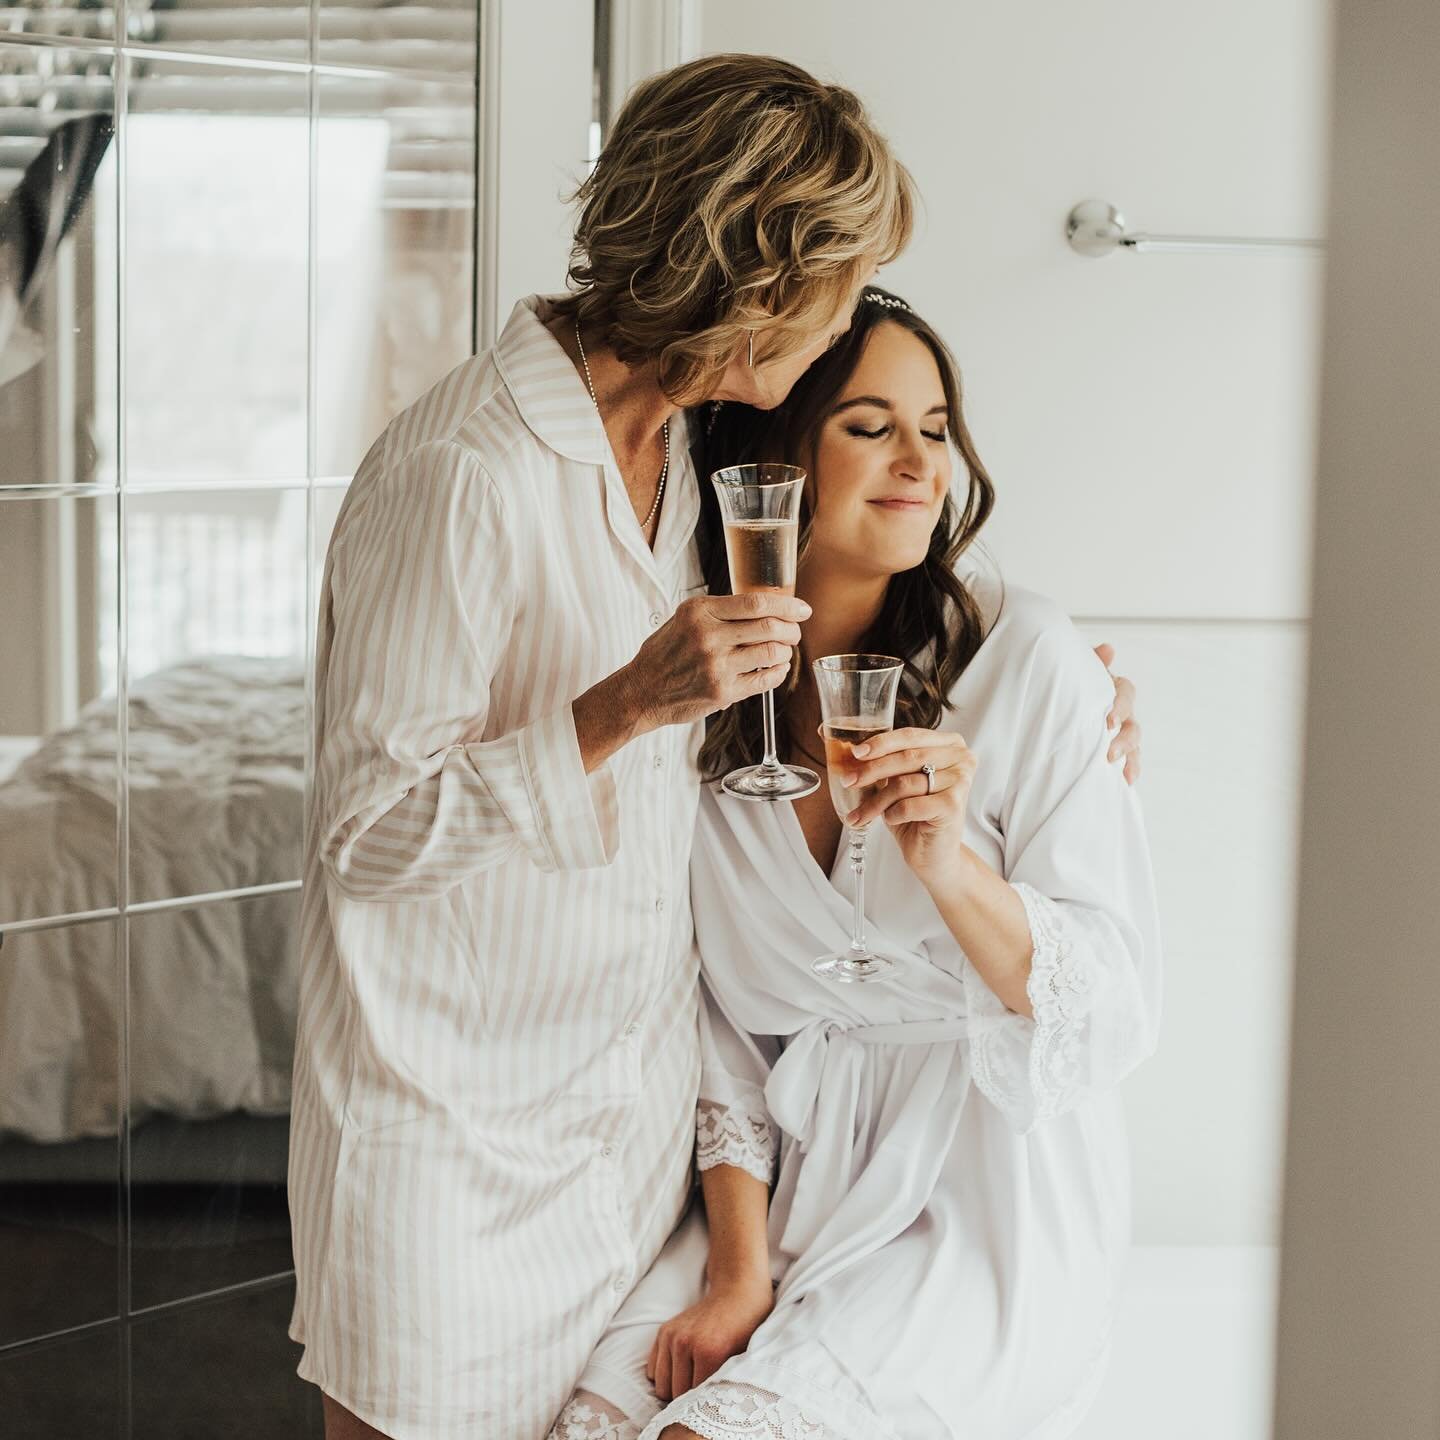 Getting ready with Mama + the girls ~ 
I loved all of the sweet moments between Kelsey and her mom - the excitement, the kiss, and joy to be there with each other. I had to bring them into a quieter room, just the two of them, to document the relatio